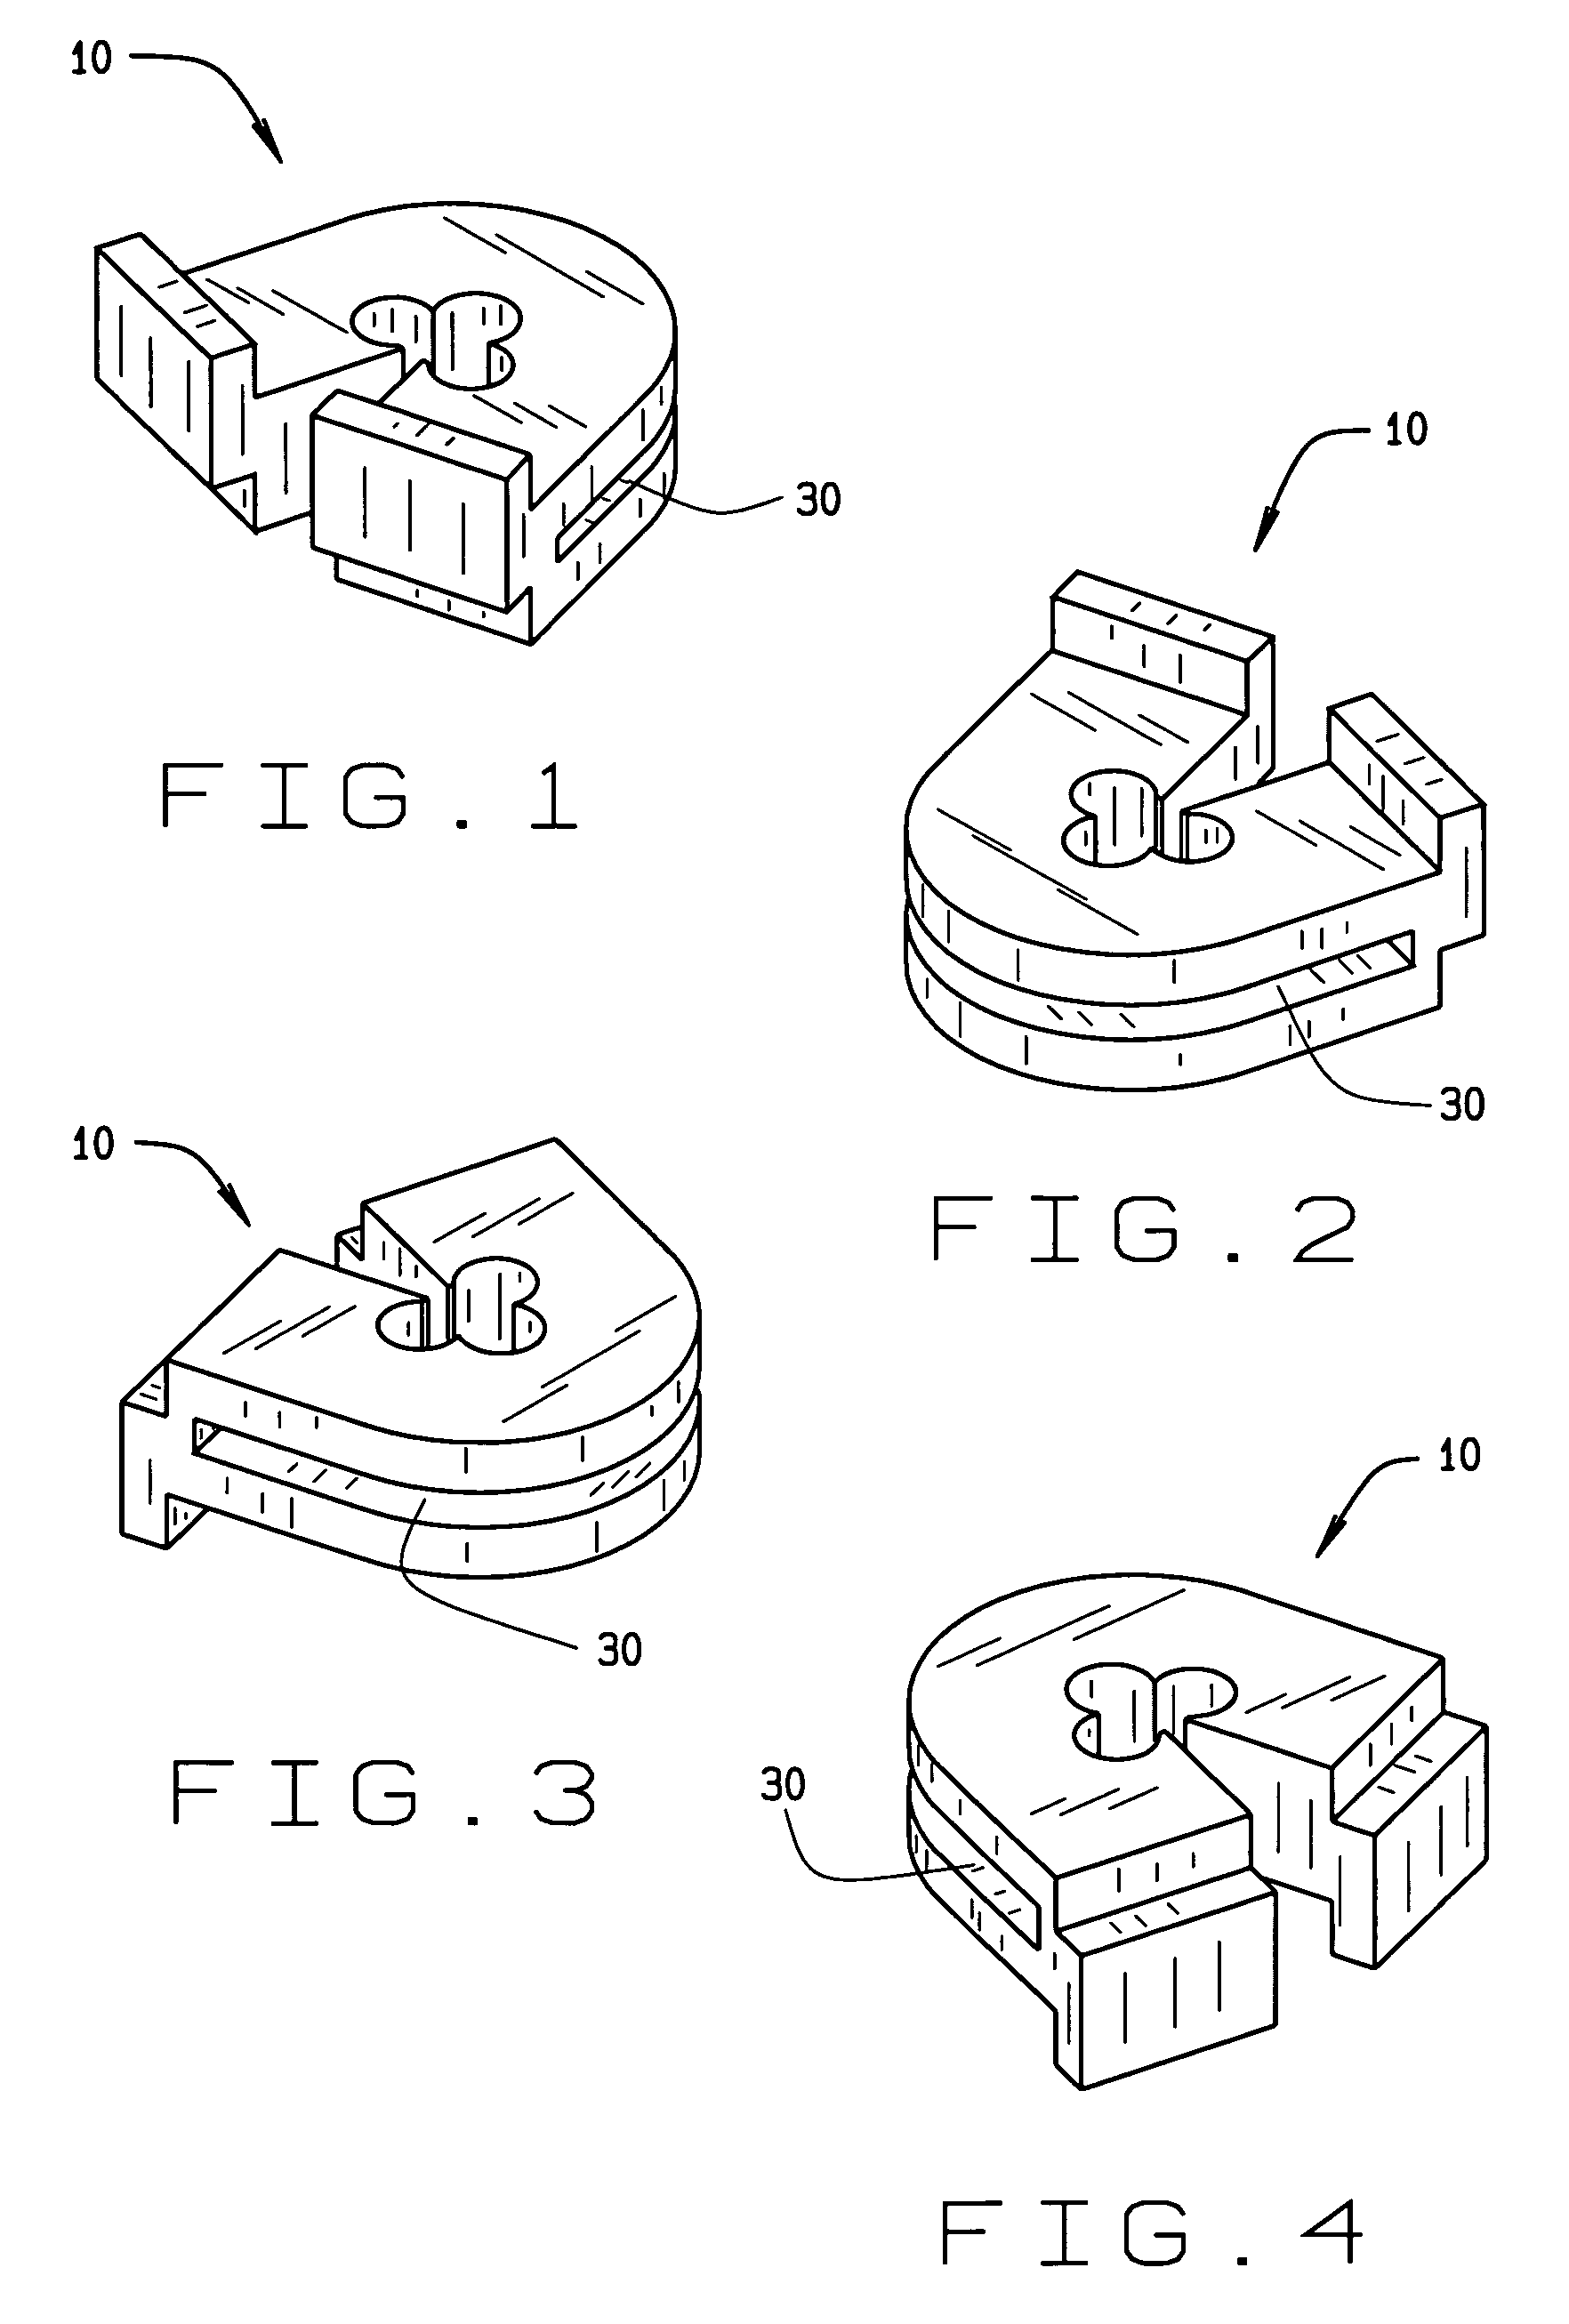 Grommets for sealing a hole in an electrical device housing through which electrical connectors exit